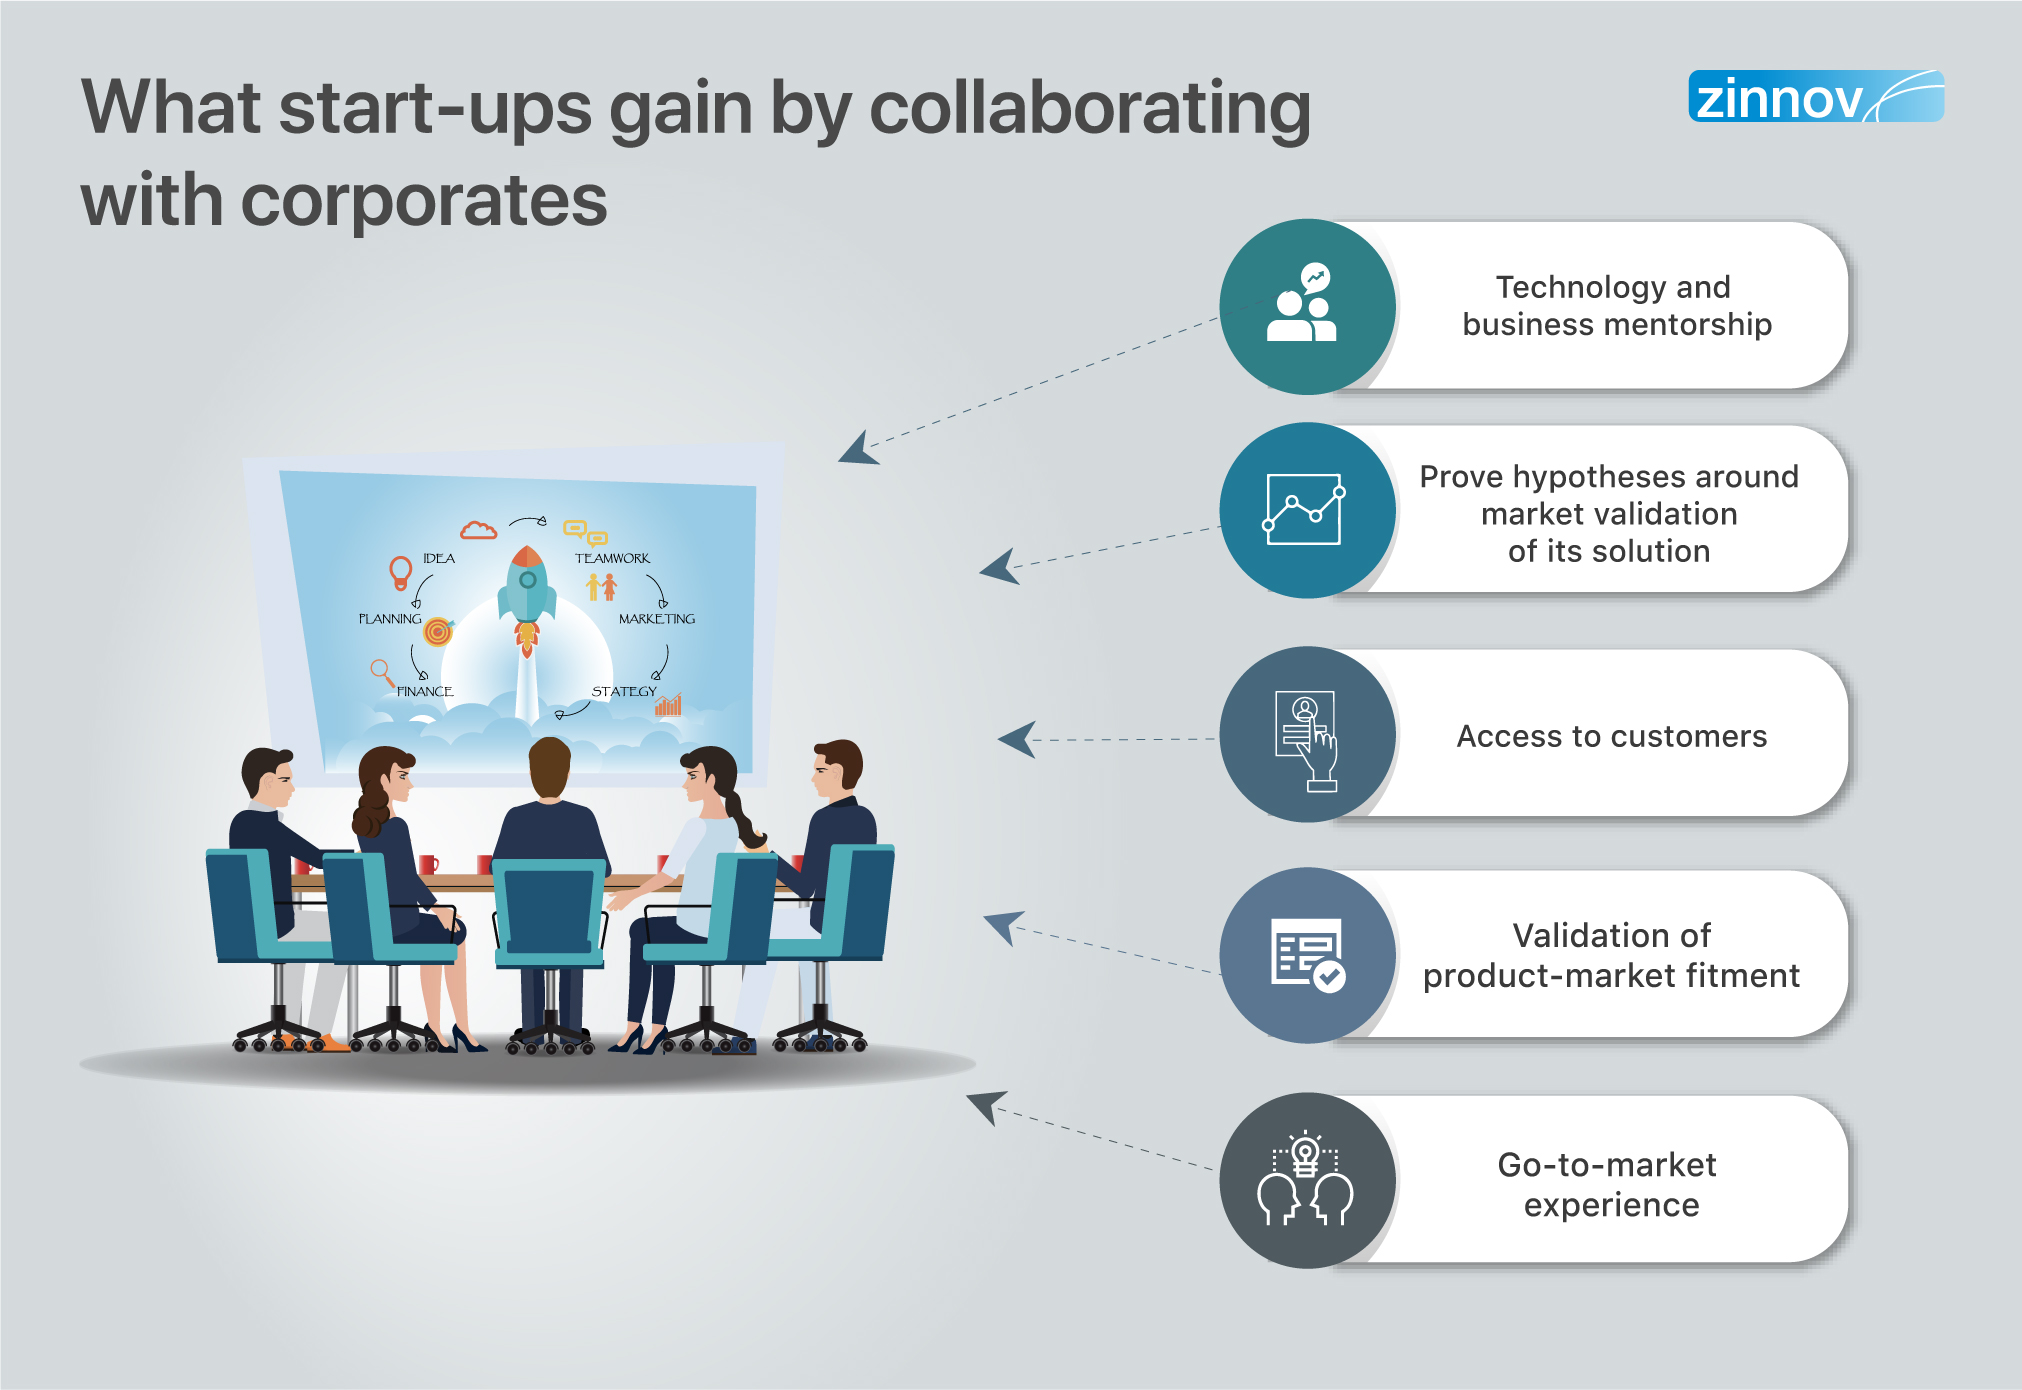 What start-ups gain by collaborating with corporates.